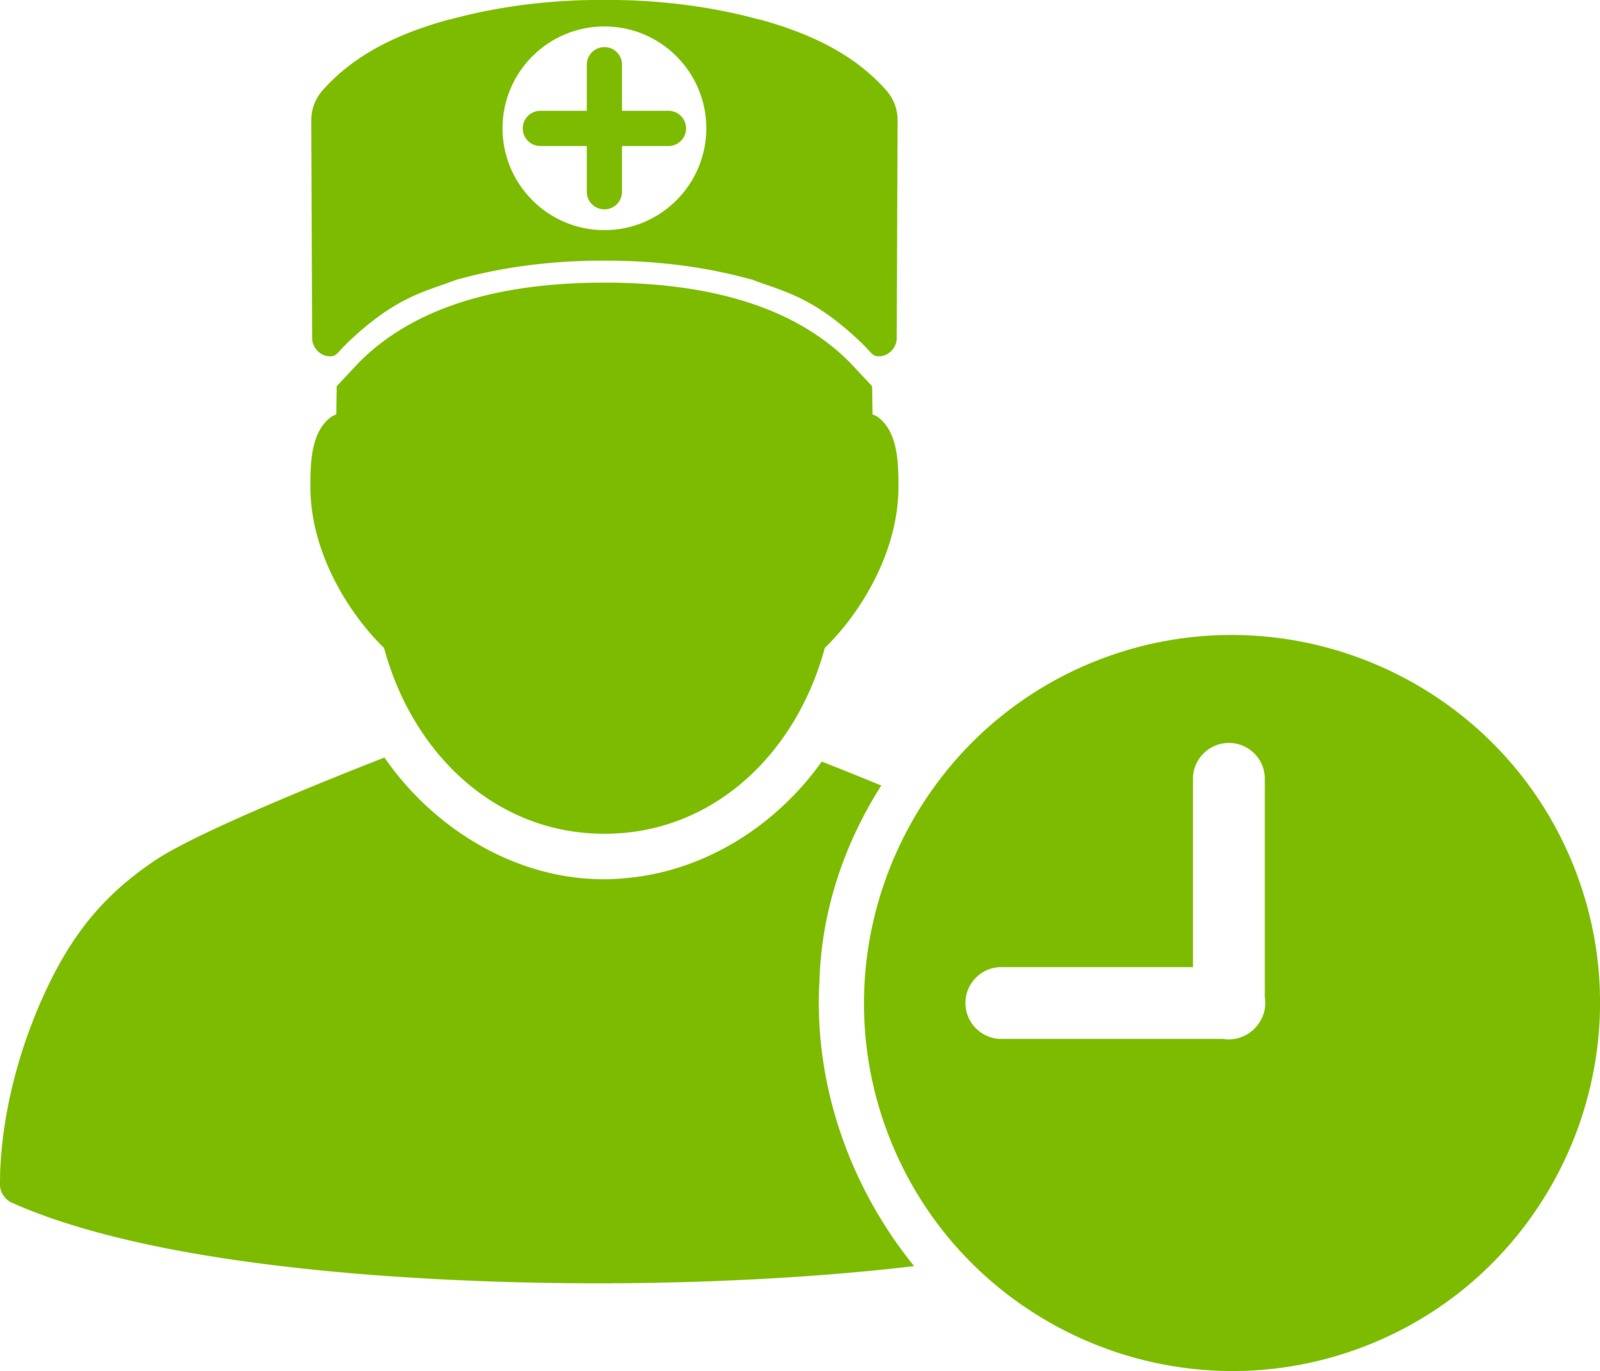 Doctor Schedule vector icon. Style is flat symbol, eco green color, rounded angles, white background.